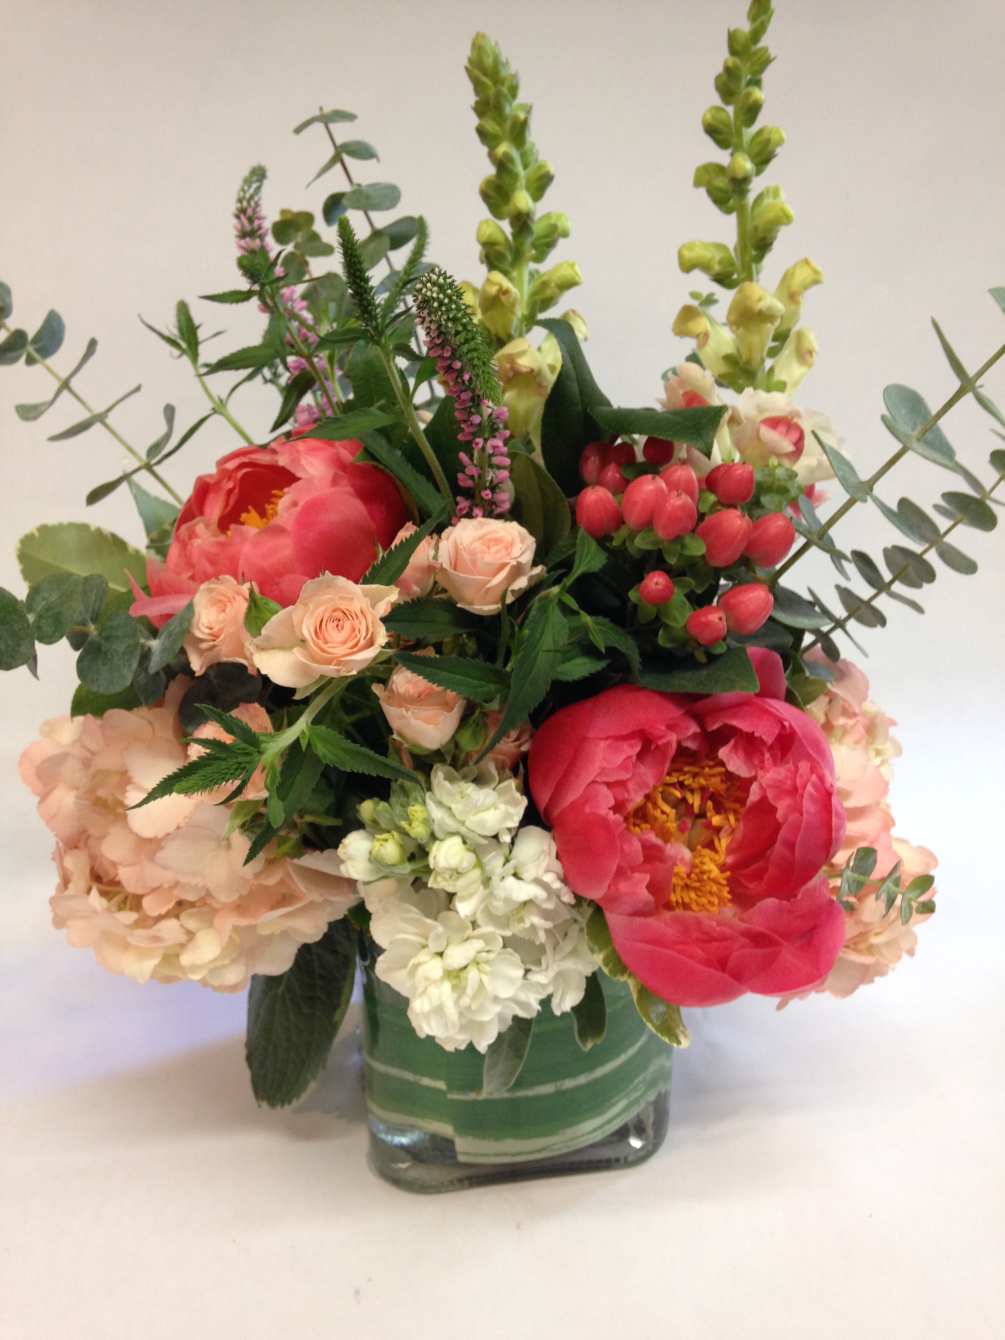 This spring bouquet comes complete with peonies, hydrangea, snap dragon, eucalyptus, hypericum.